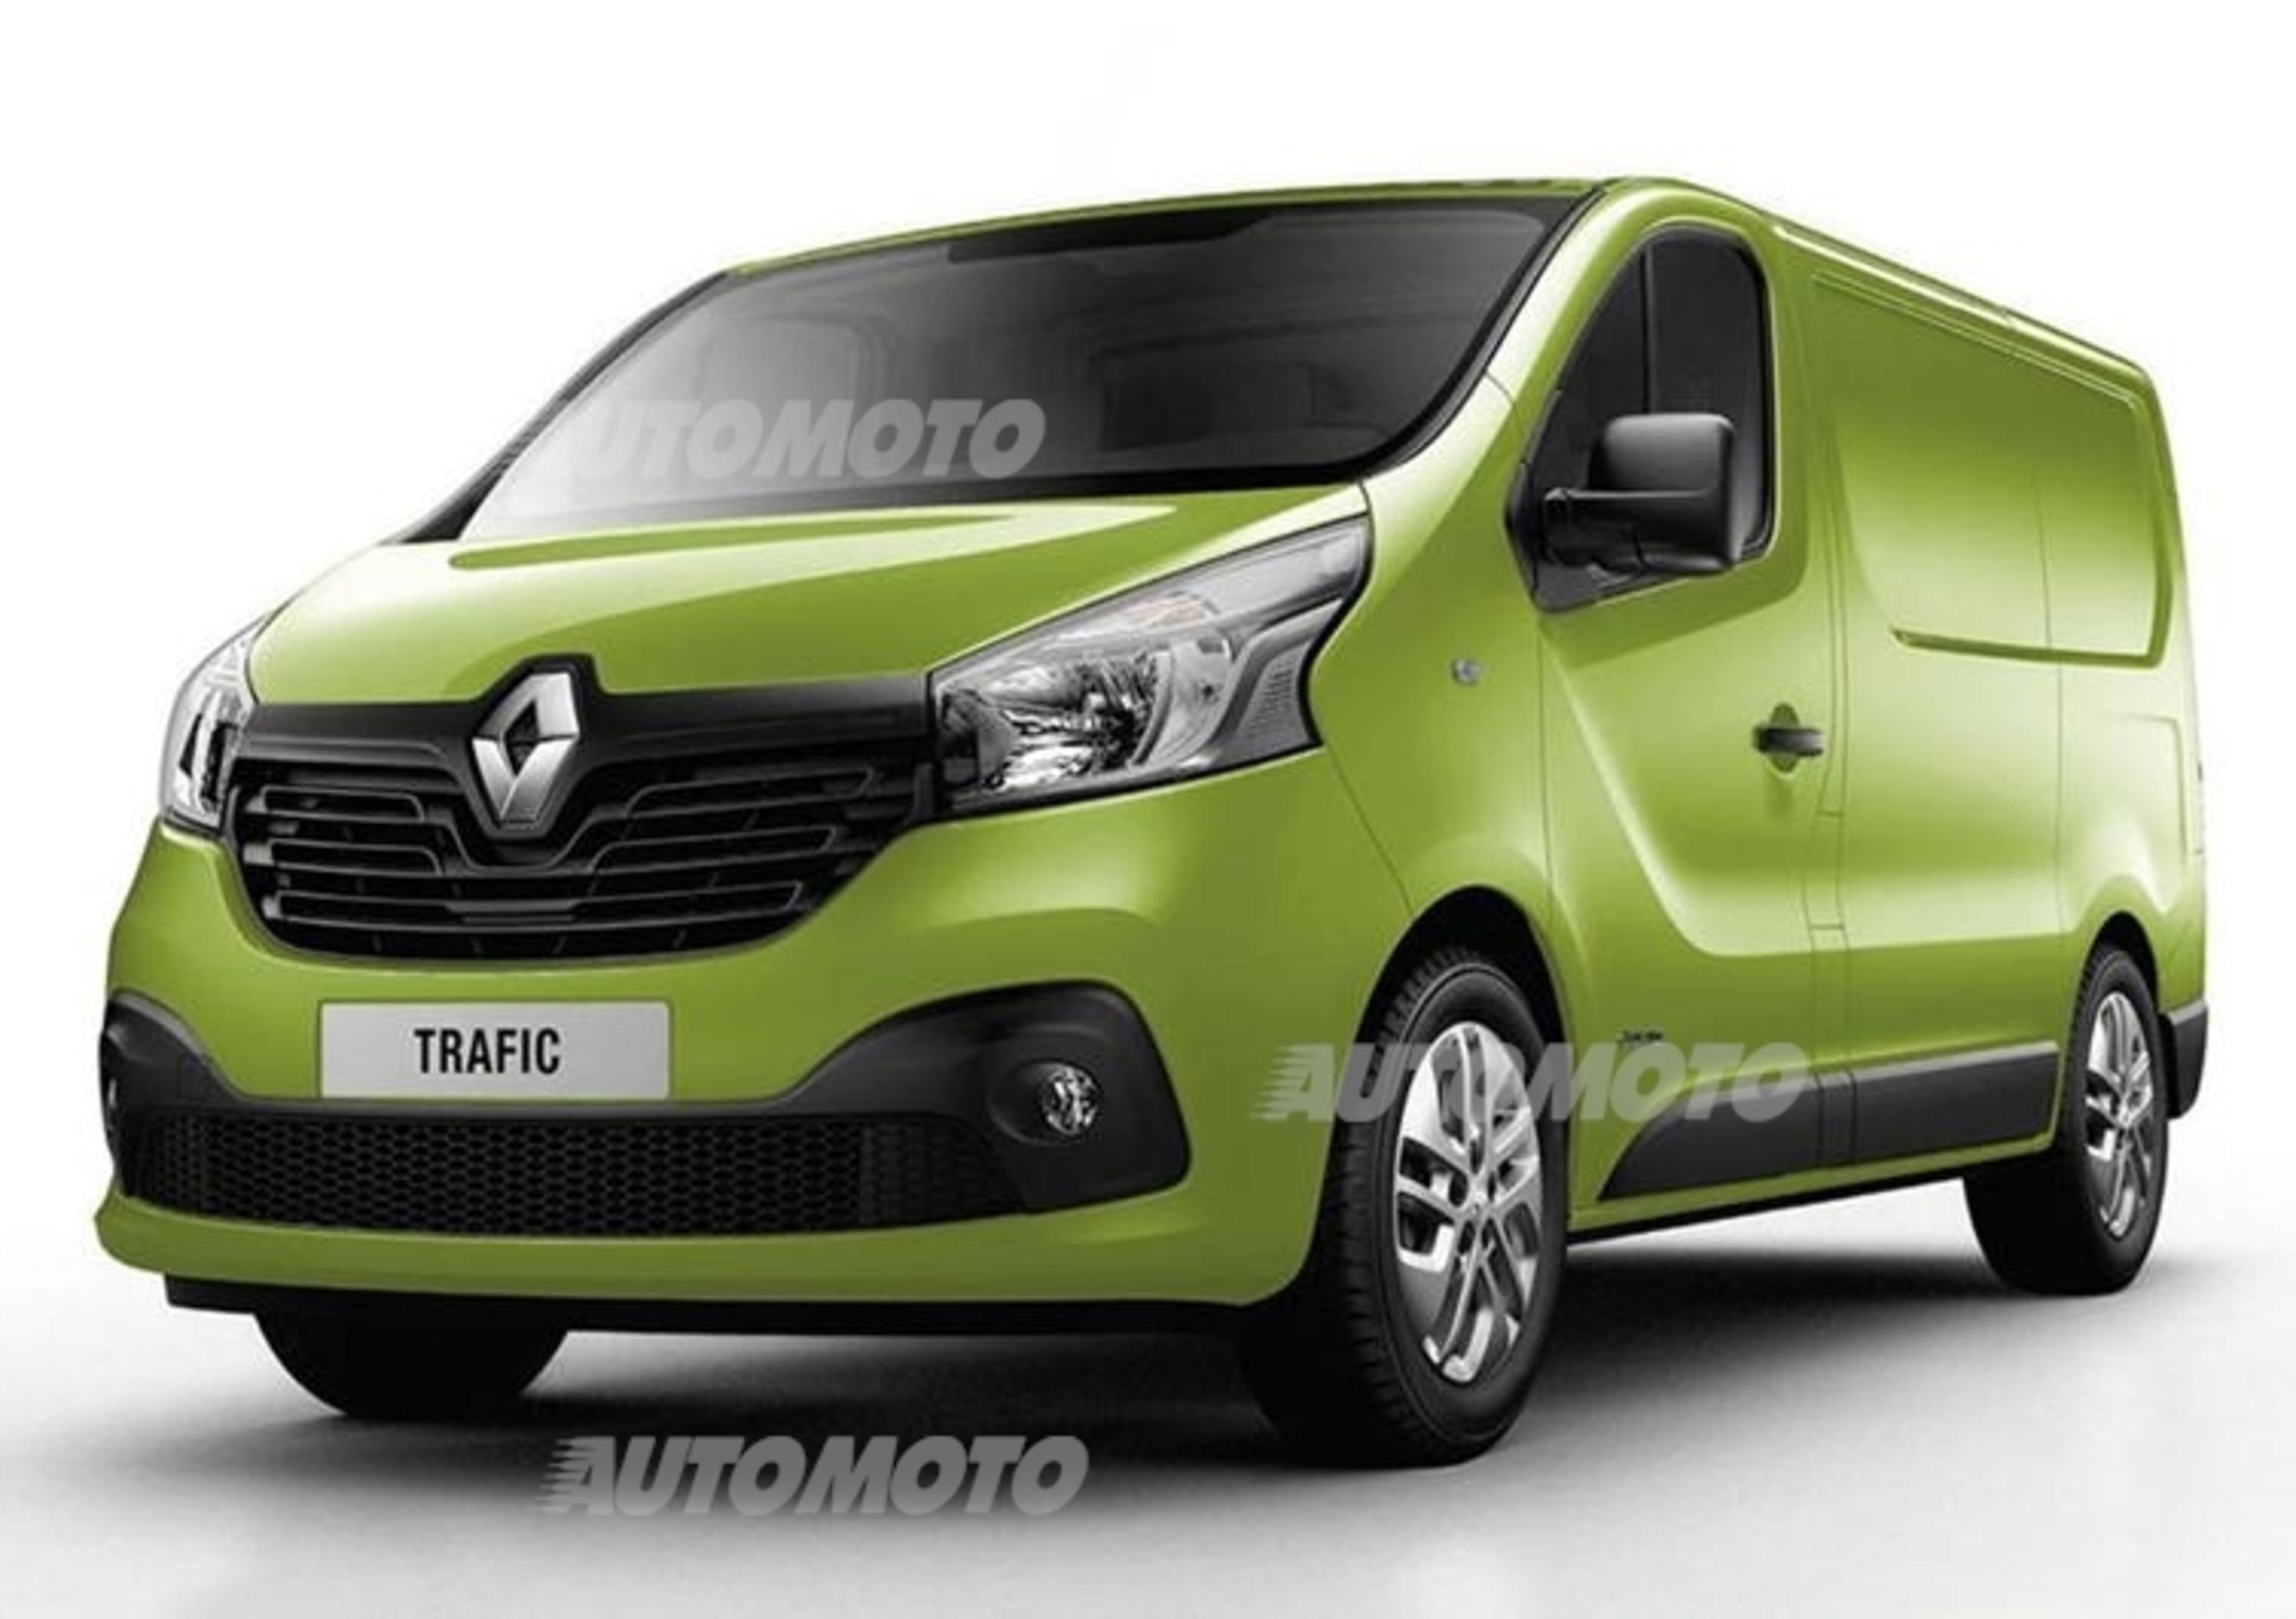 Nuovo Renault Trafic